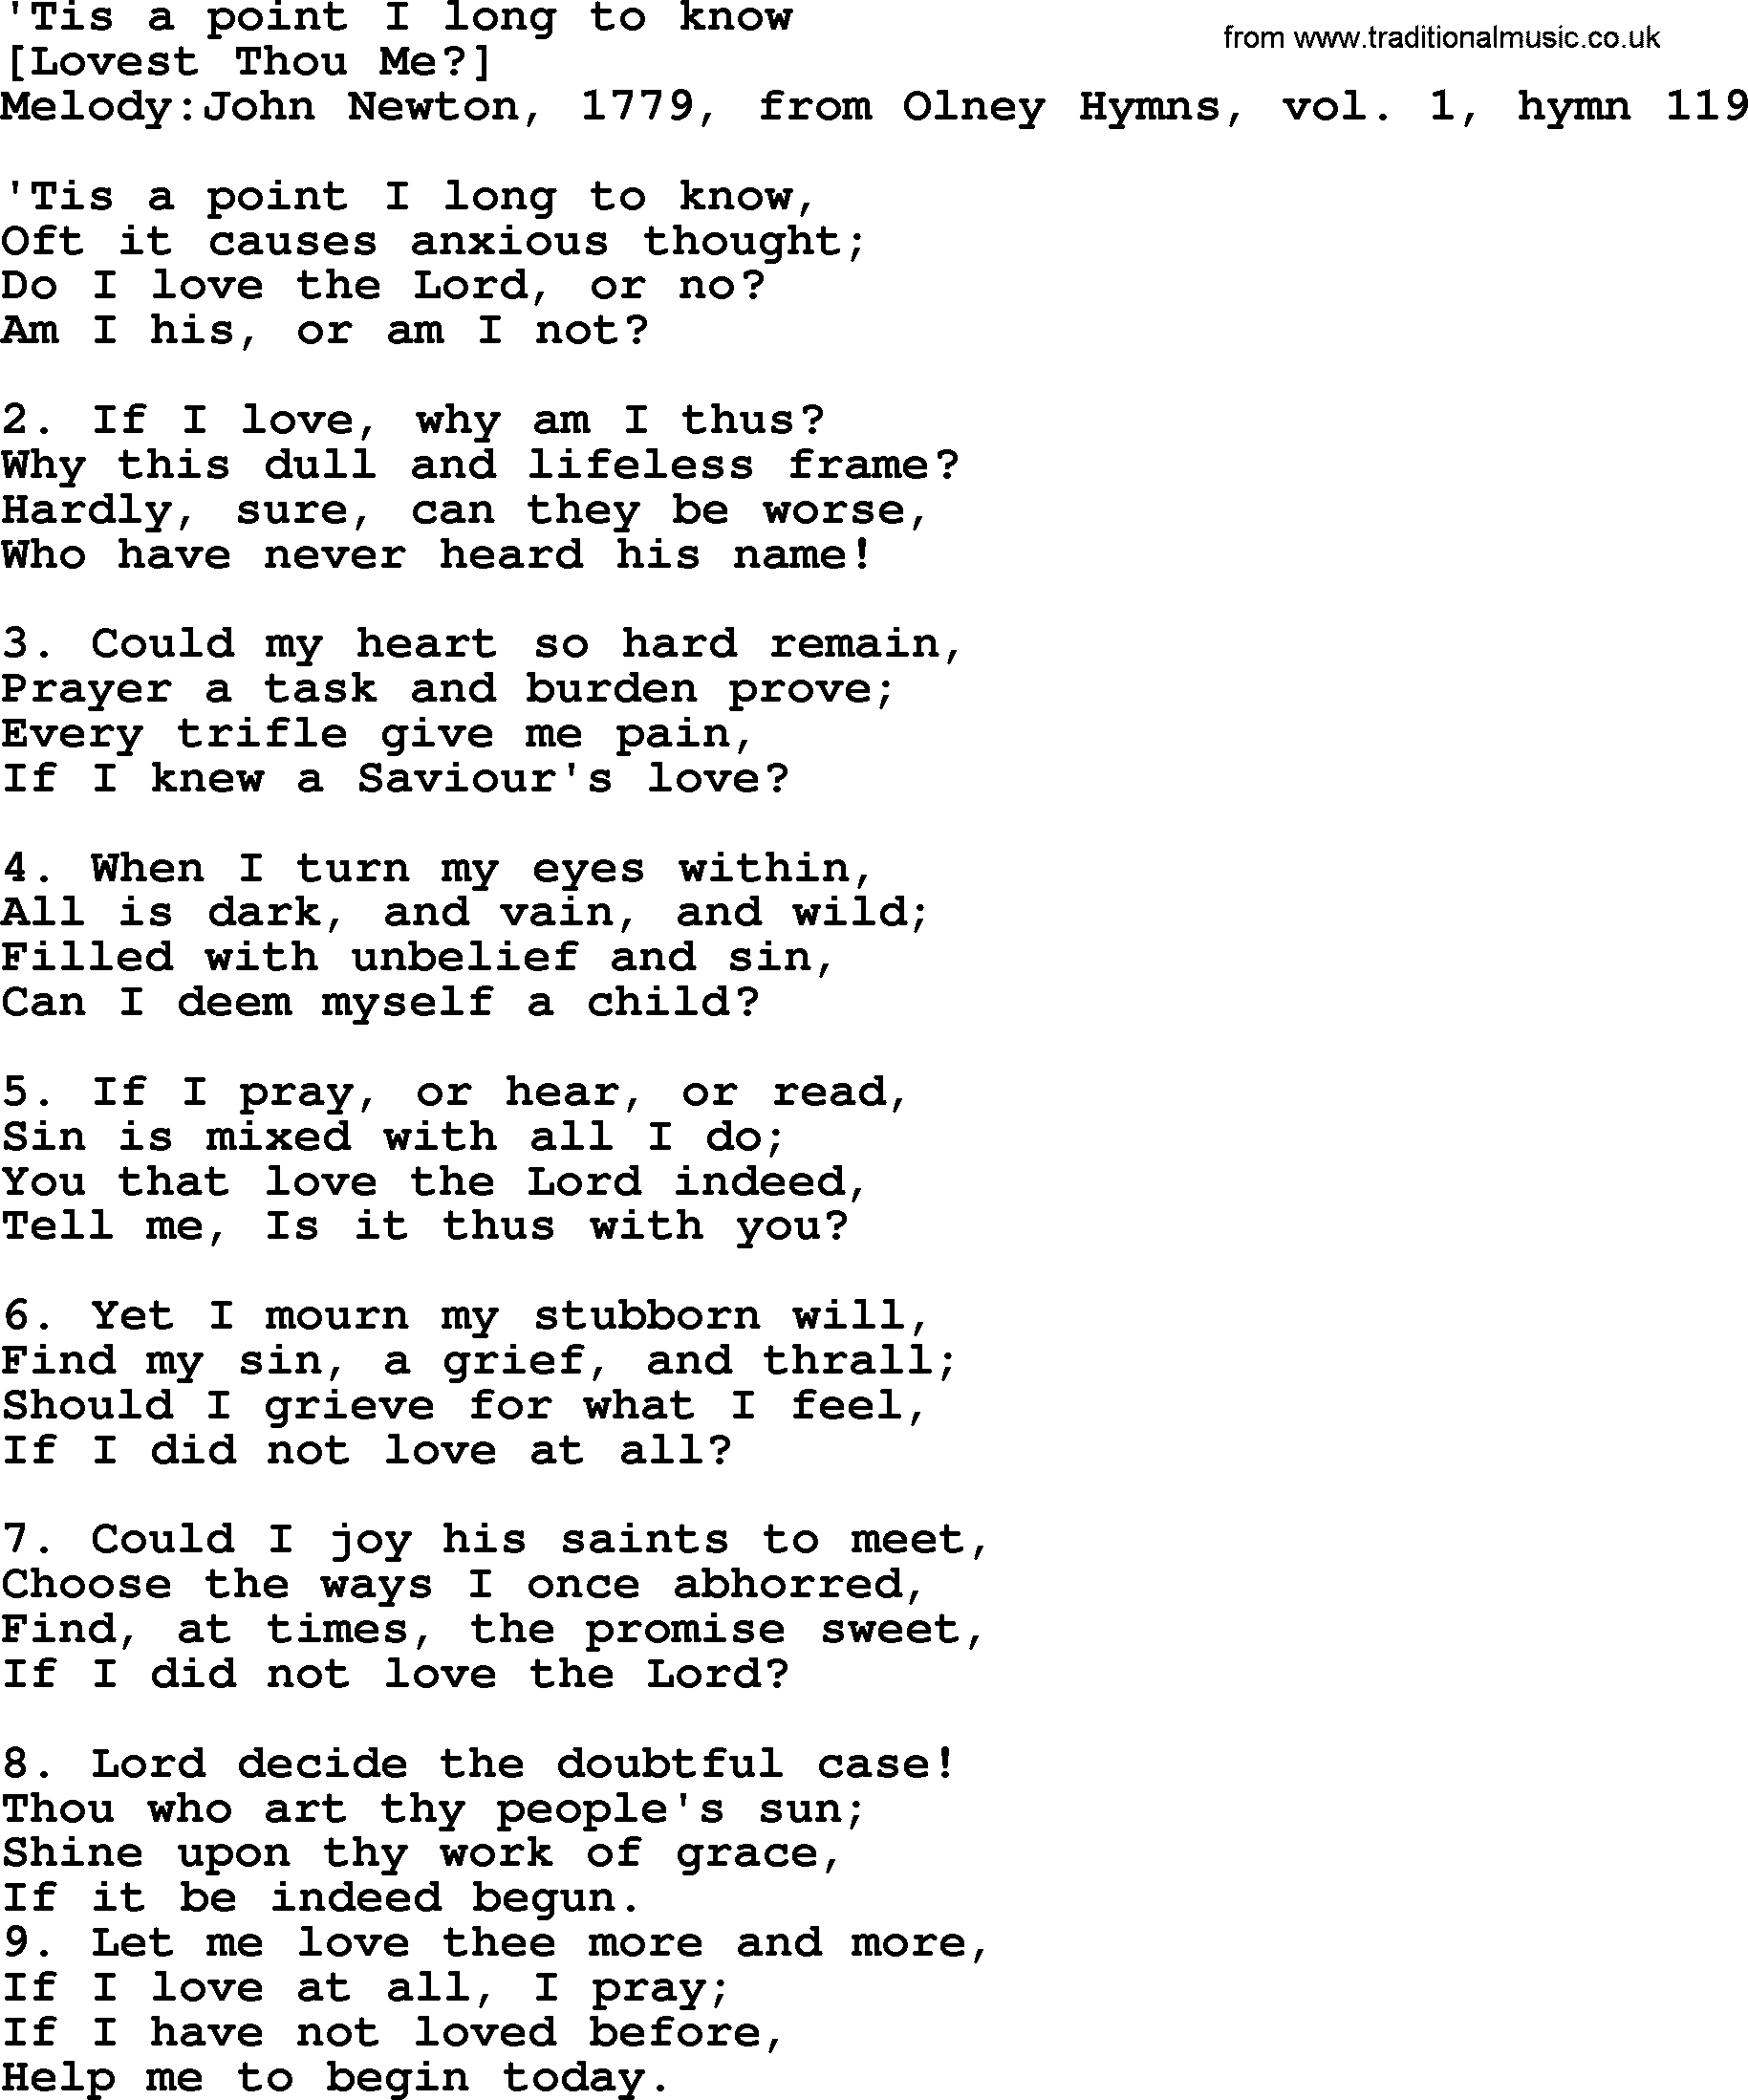 Old English Song: 'Tis A Point I Long To Know lyrics